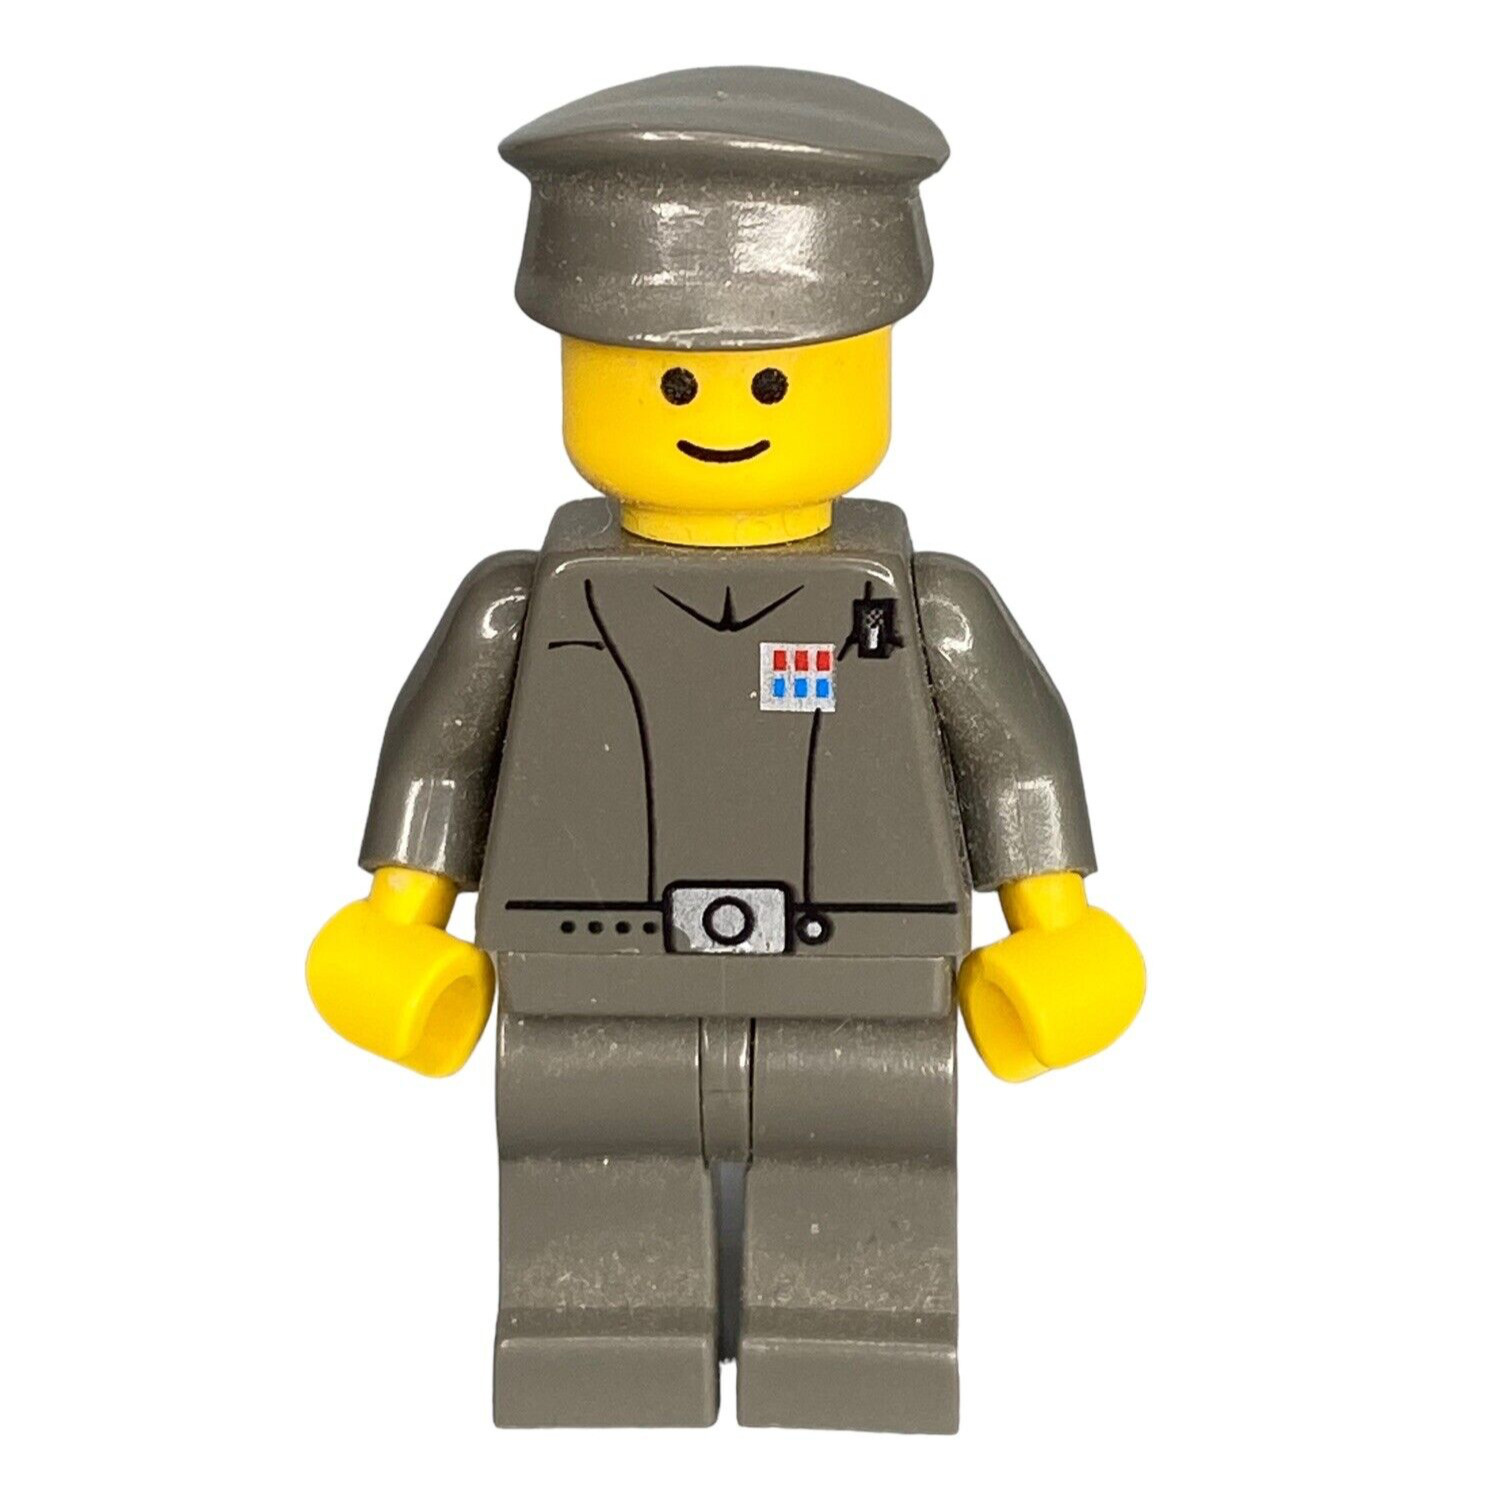 LEGO MINIFIGURE STAR WARS Imperial Officer Captain Commander sw0046 7201 2002